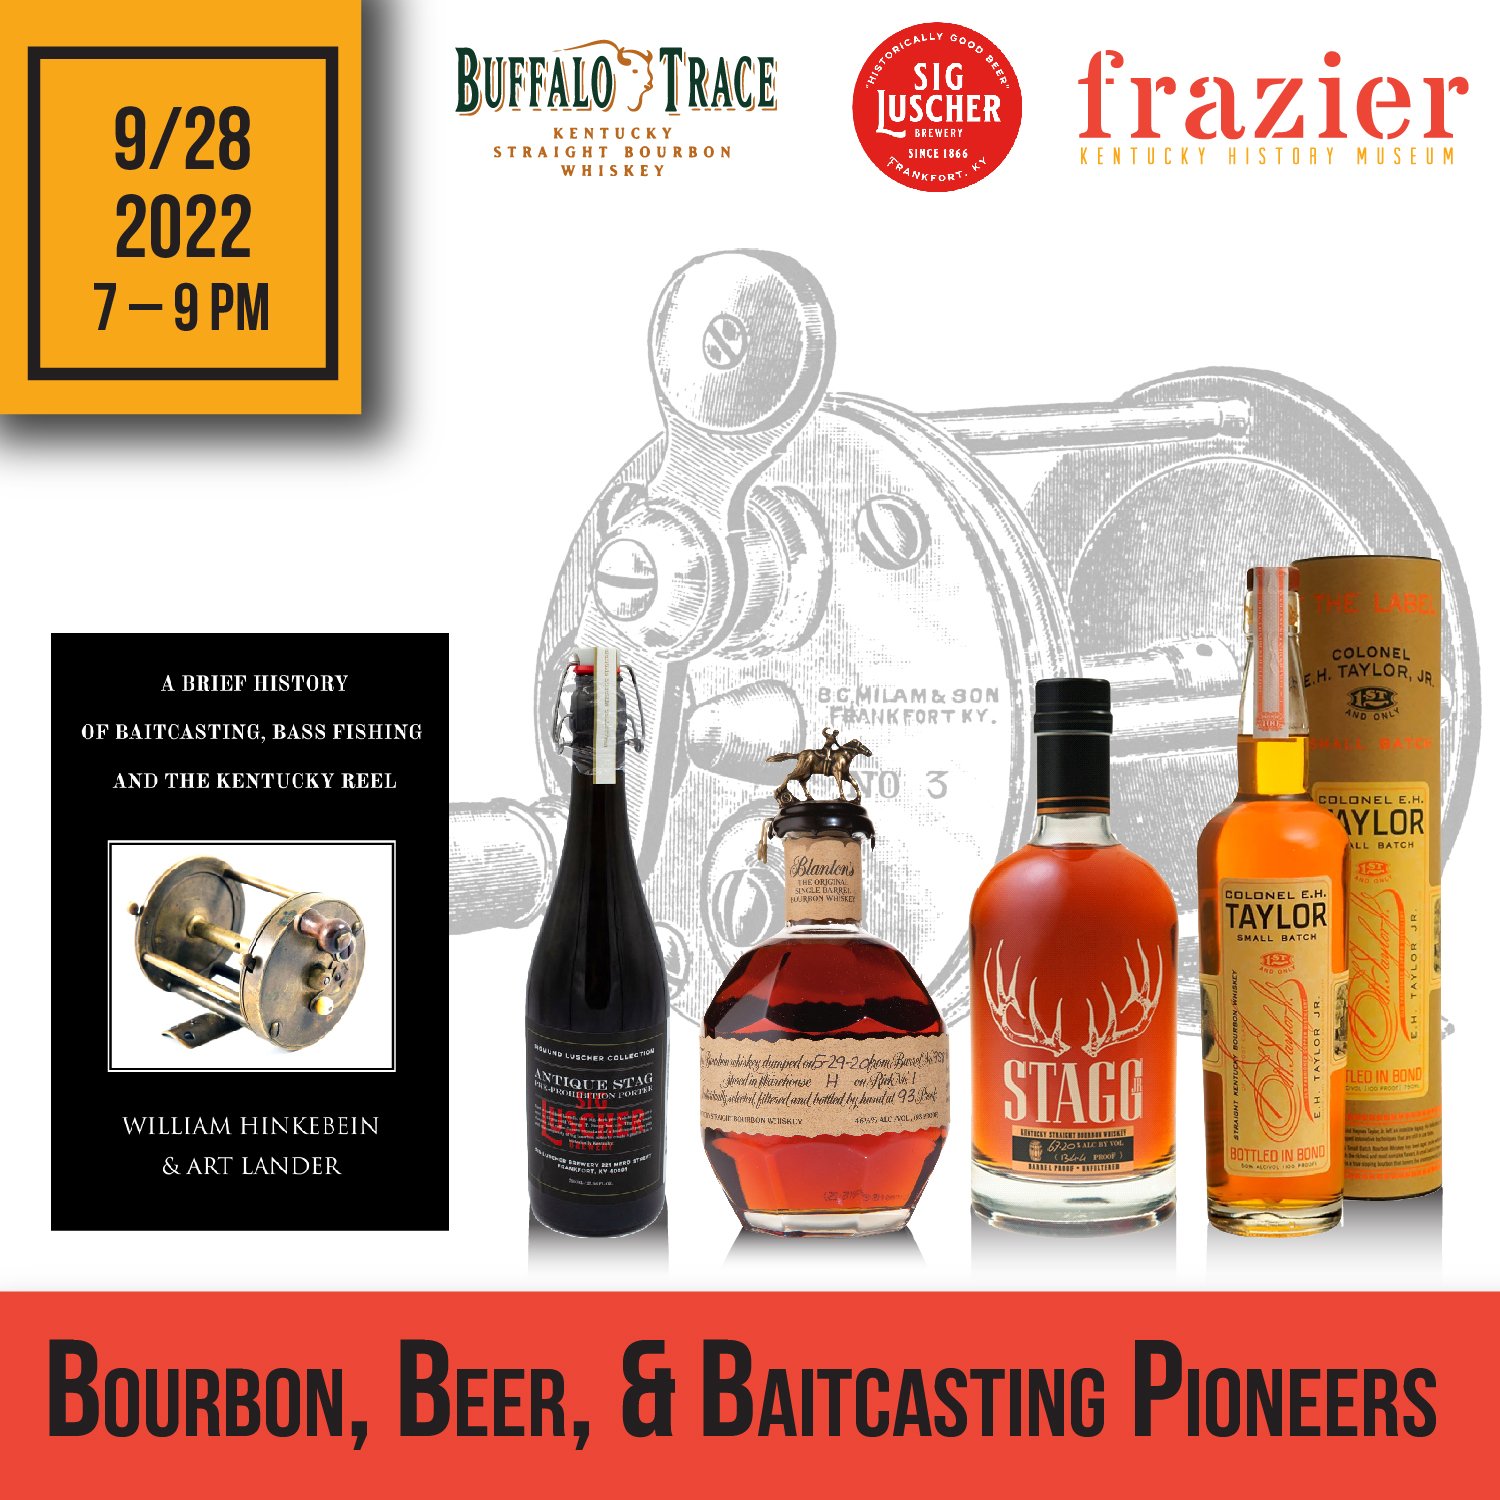 Louisville Bats to pay tribute to bourbon as Mashers